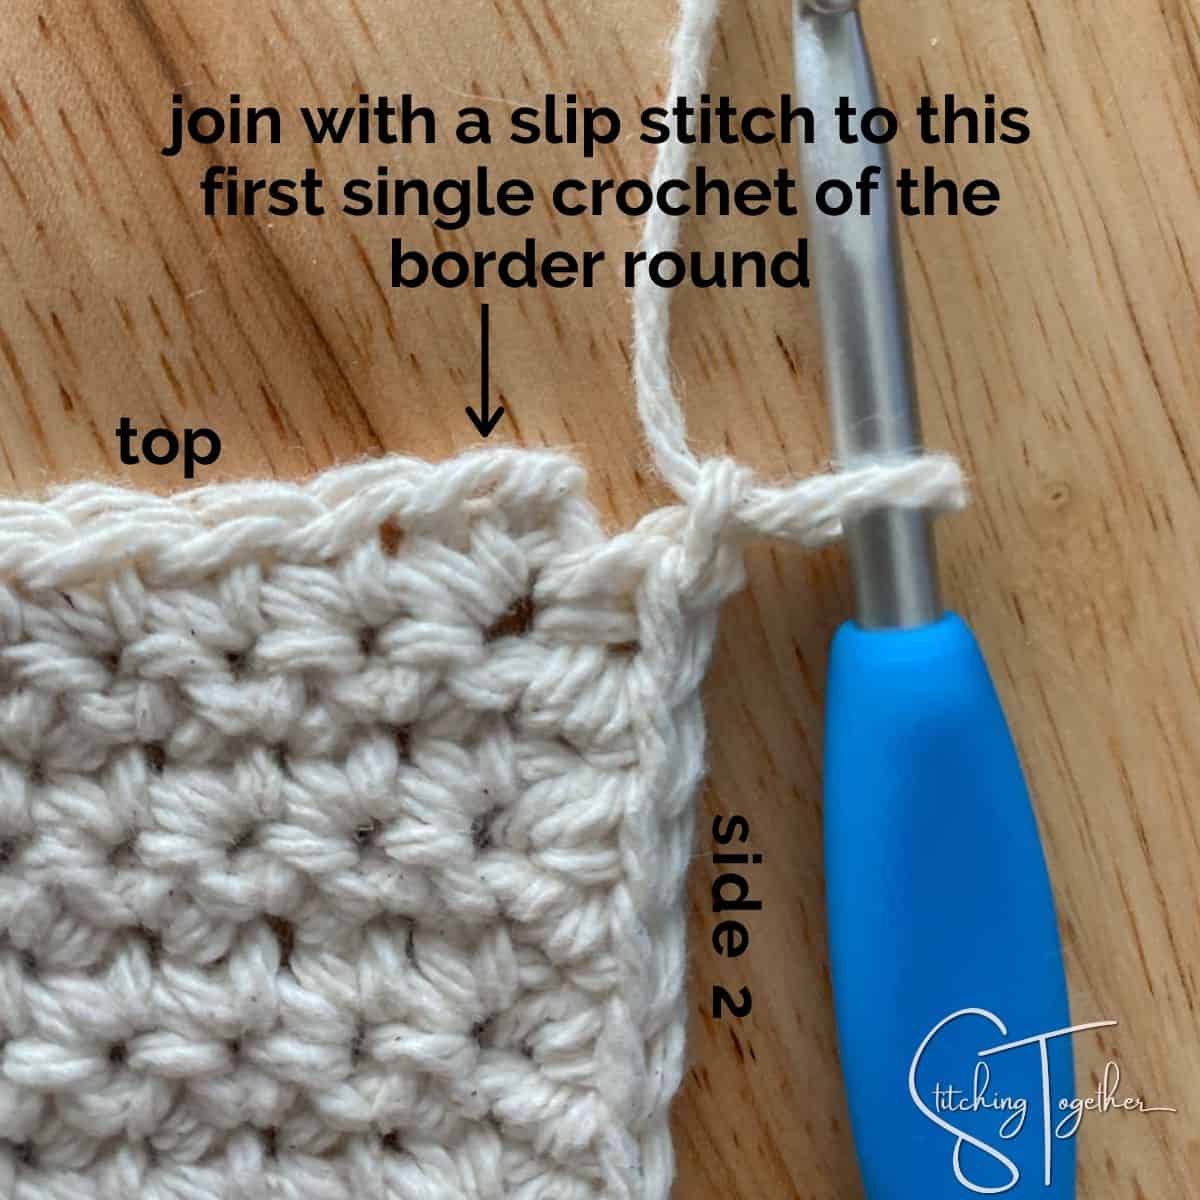 close up of corner of crochet showing where to place border stitches